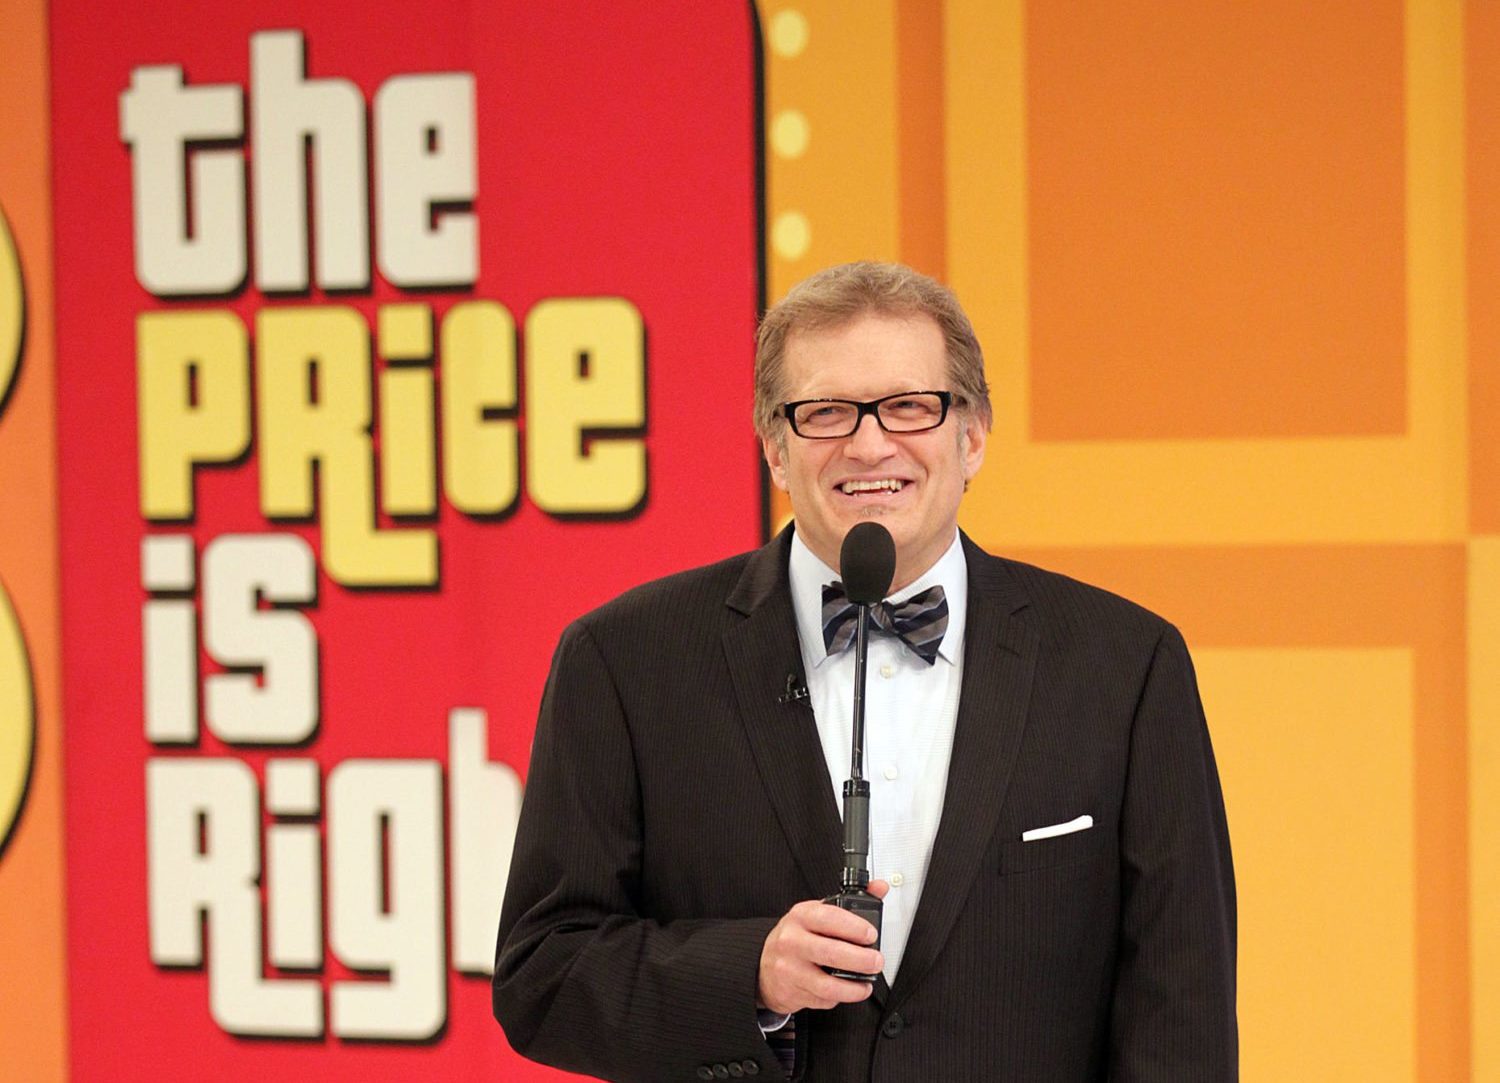 People's Choice Awards Showcase On 'The Price Is Right' With Pauley Perrette